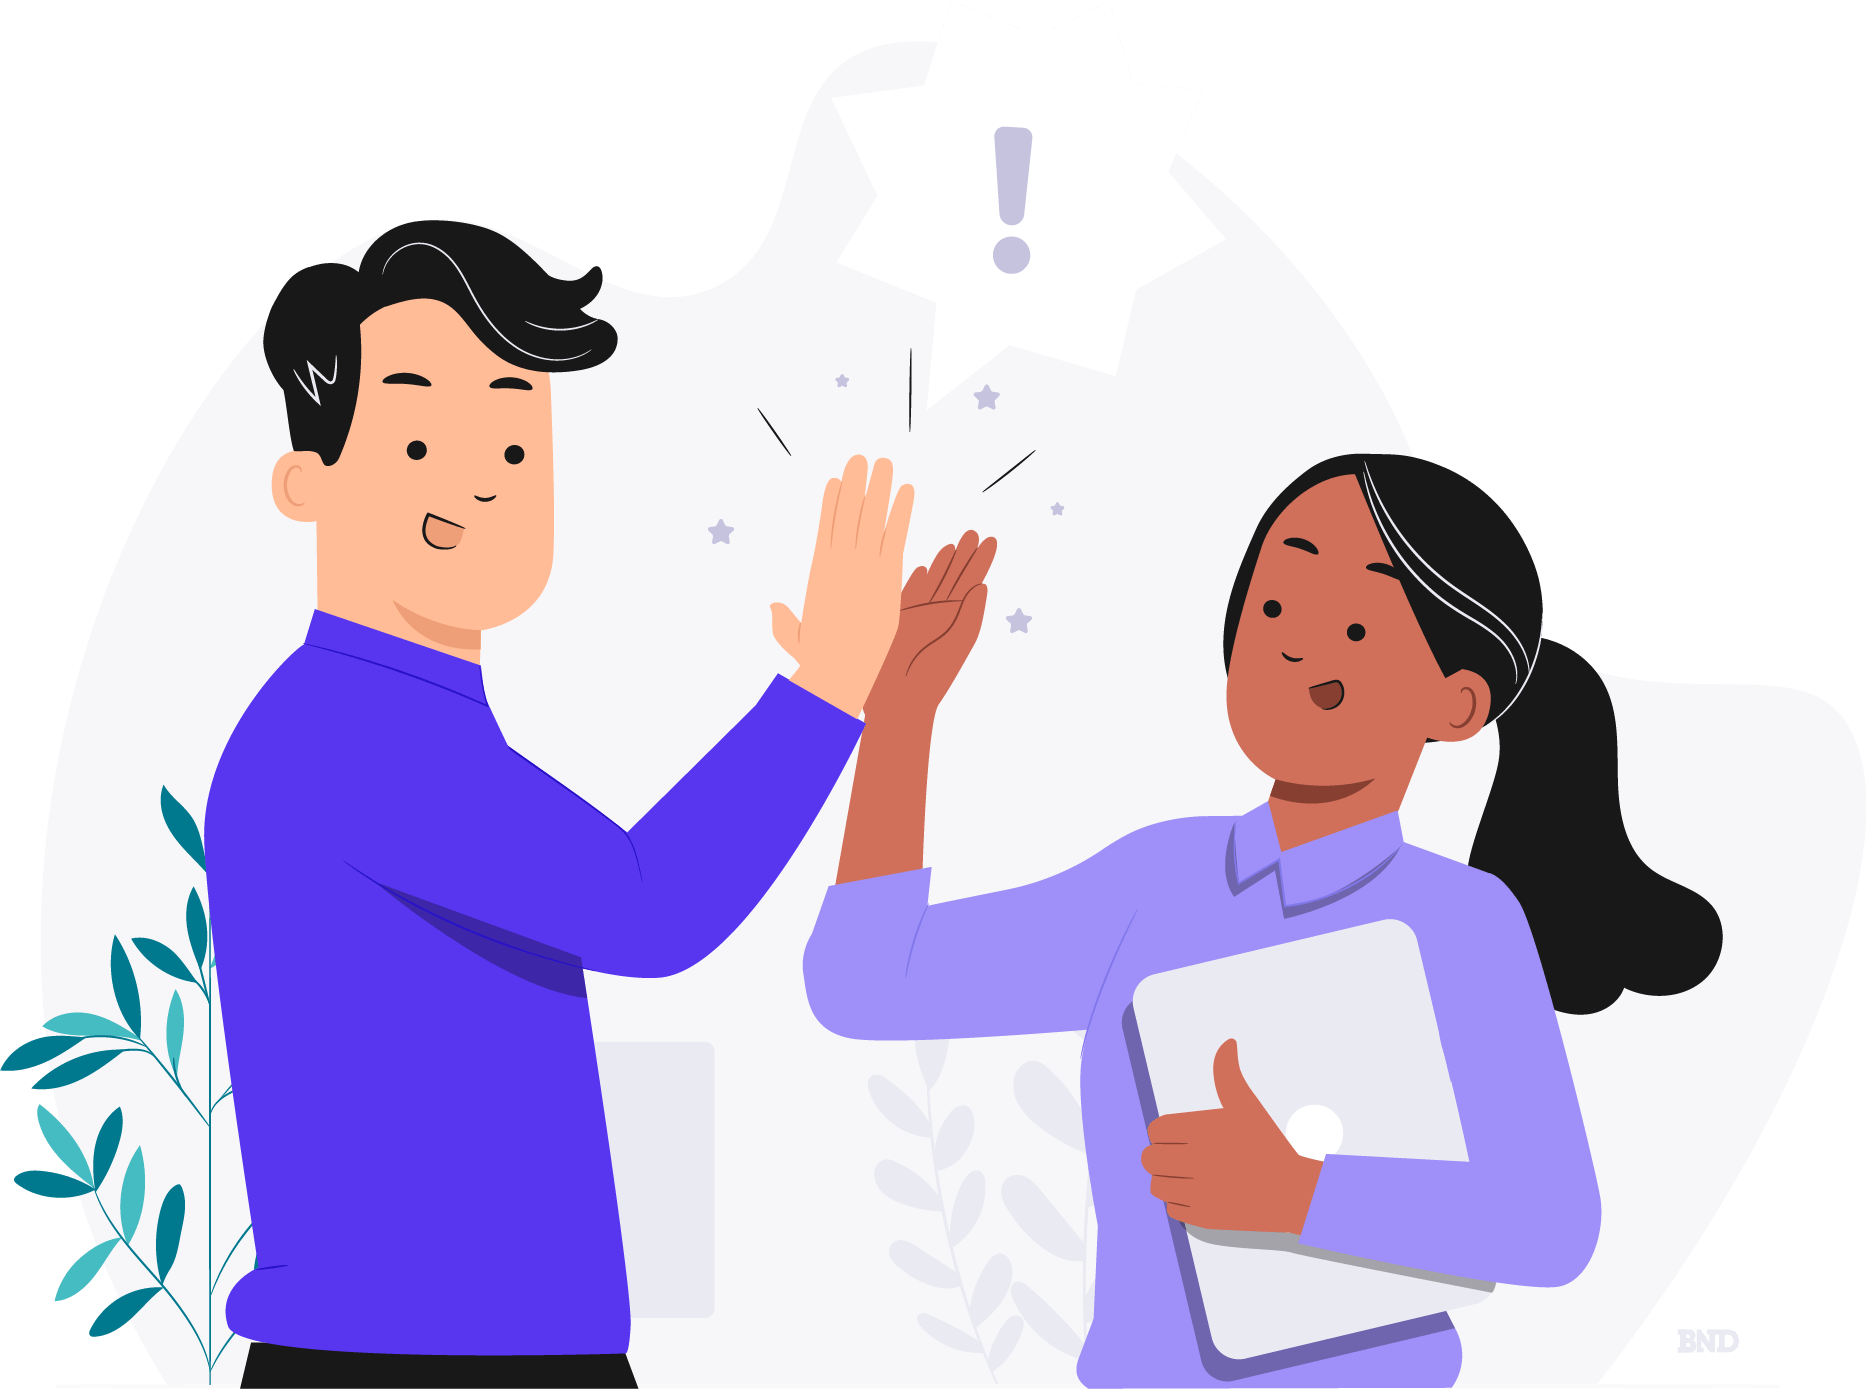 graphic of two colleagues high-fiving